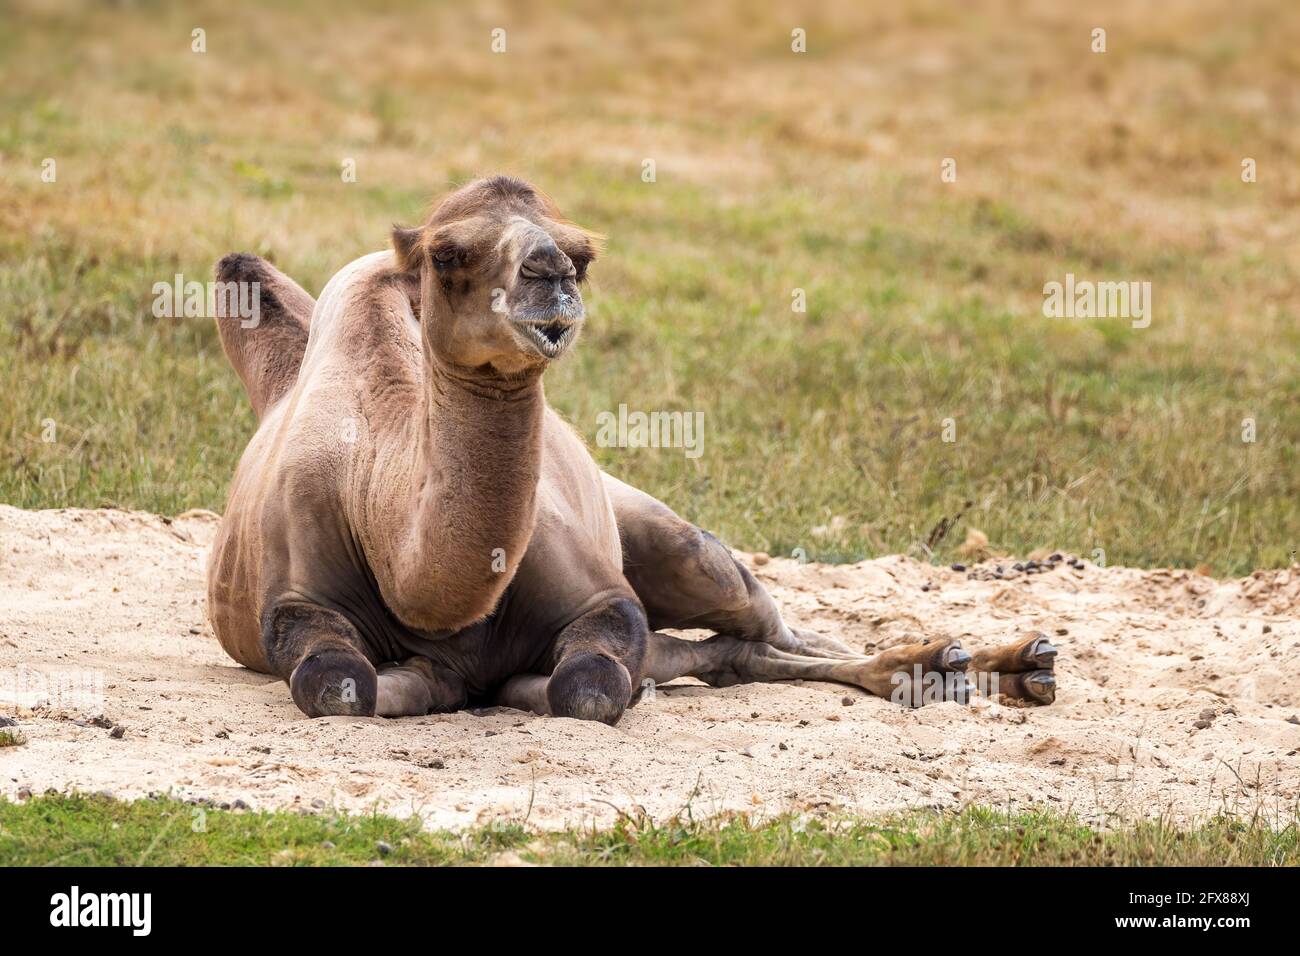 Bactrian camel, camelus bactrianus, laying in sand. The bactrian, or ...